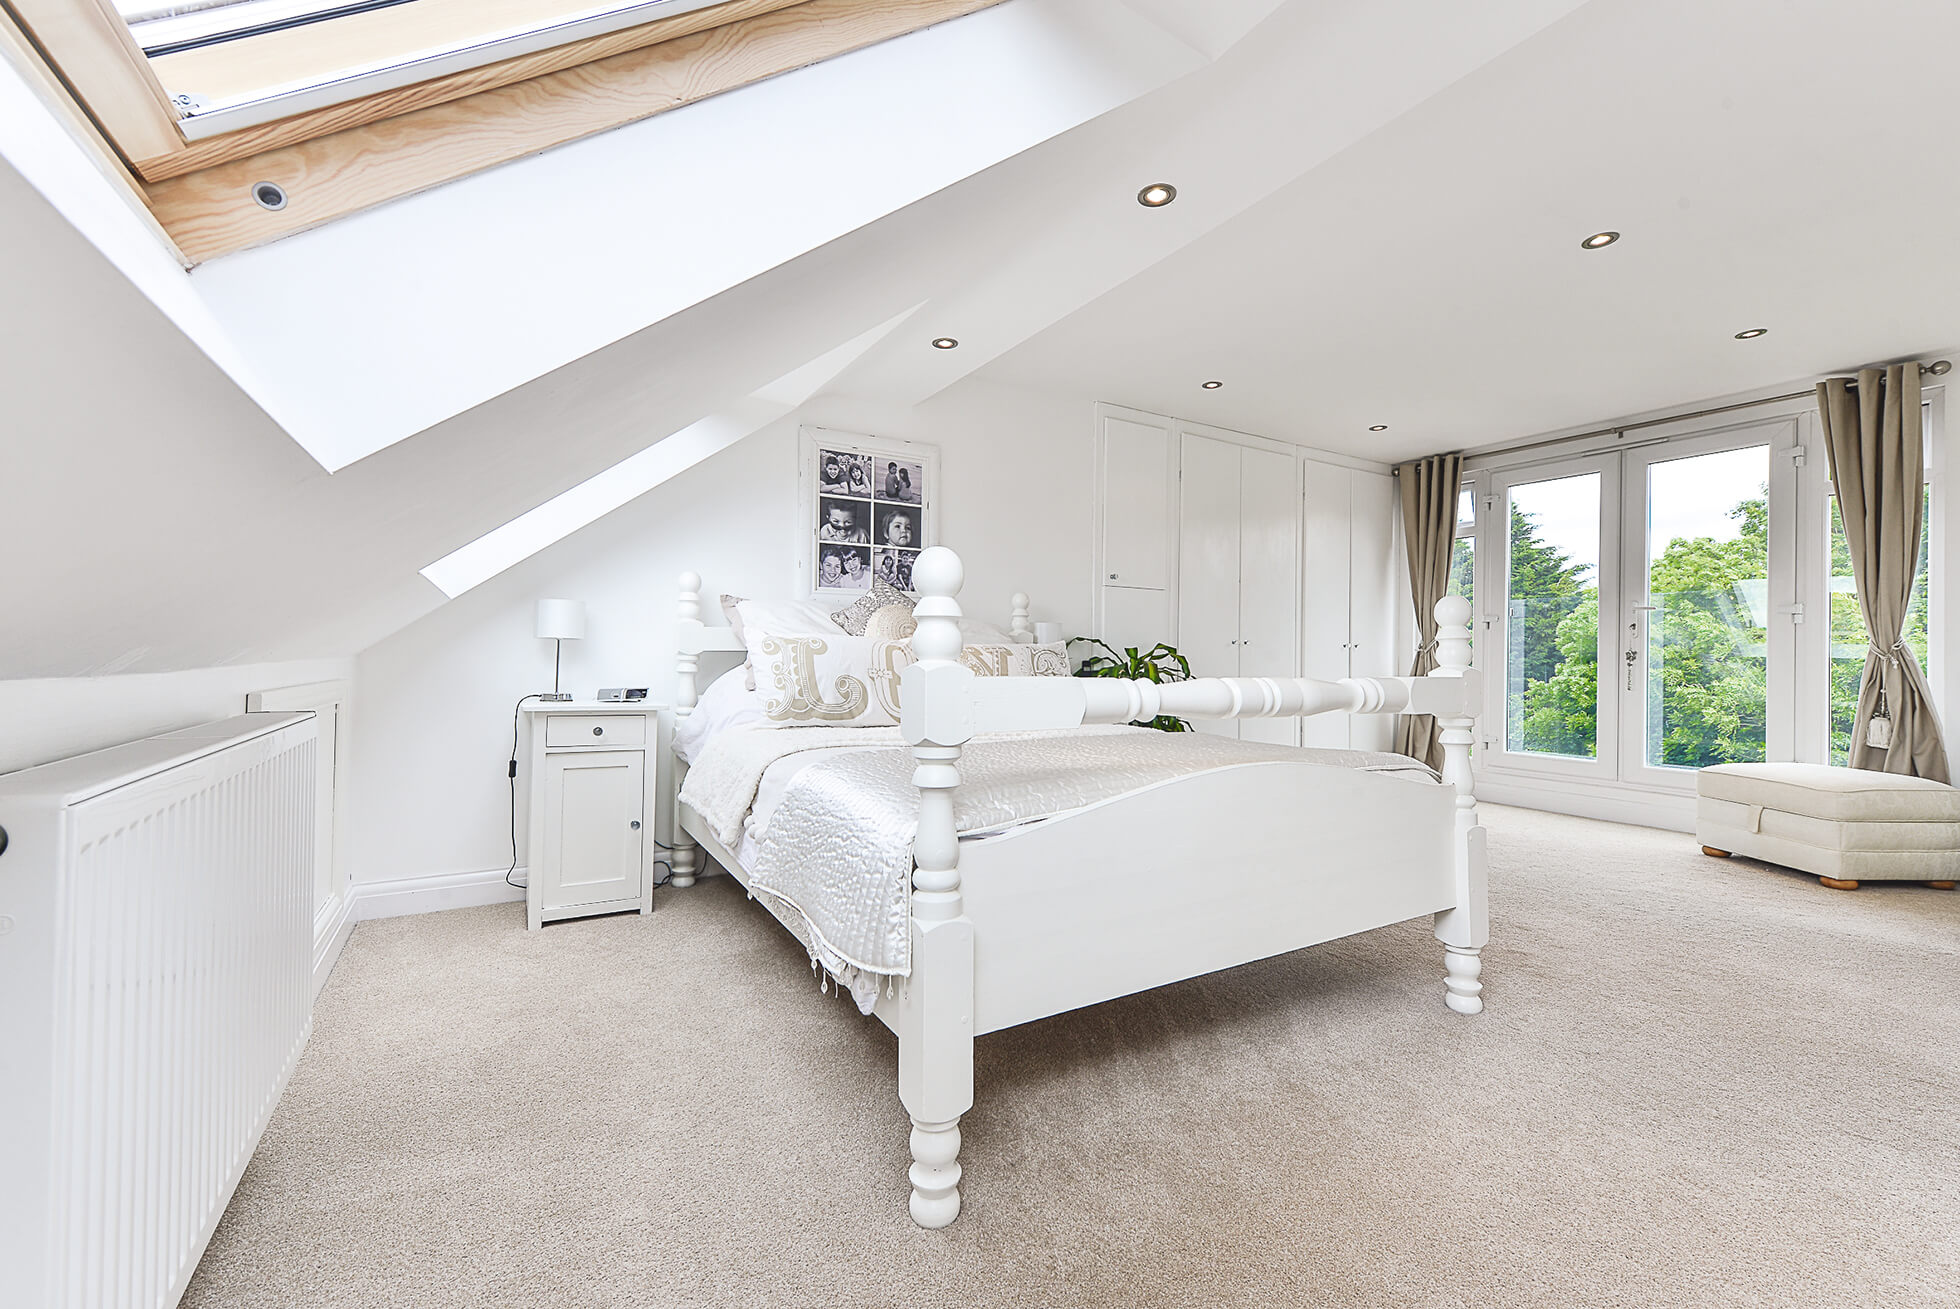 Do you have a question about converting your Loft in Heronsgate? Here are the most popular questions asked by our clients.